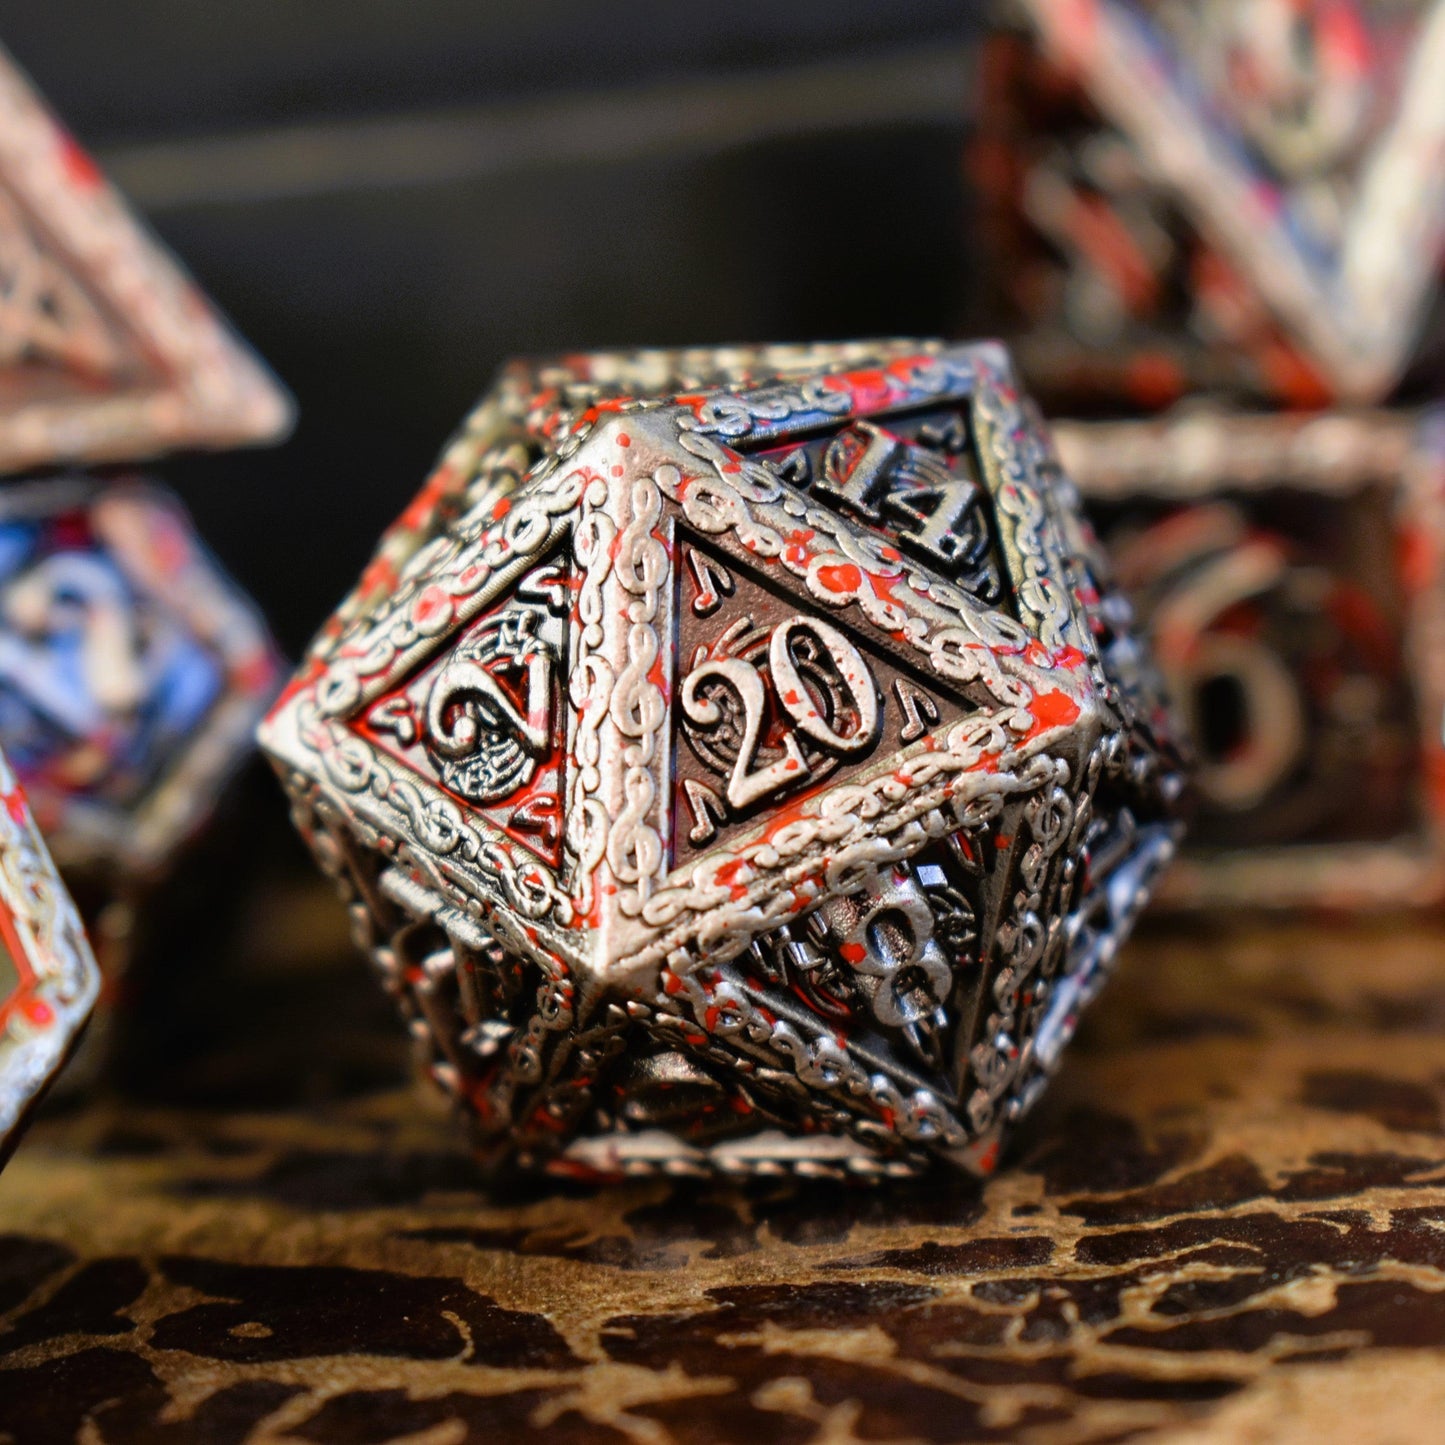 Ballad of the Bard Bloodstained Silver Metal Dice Set